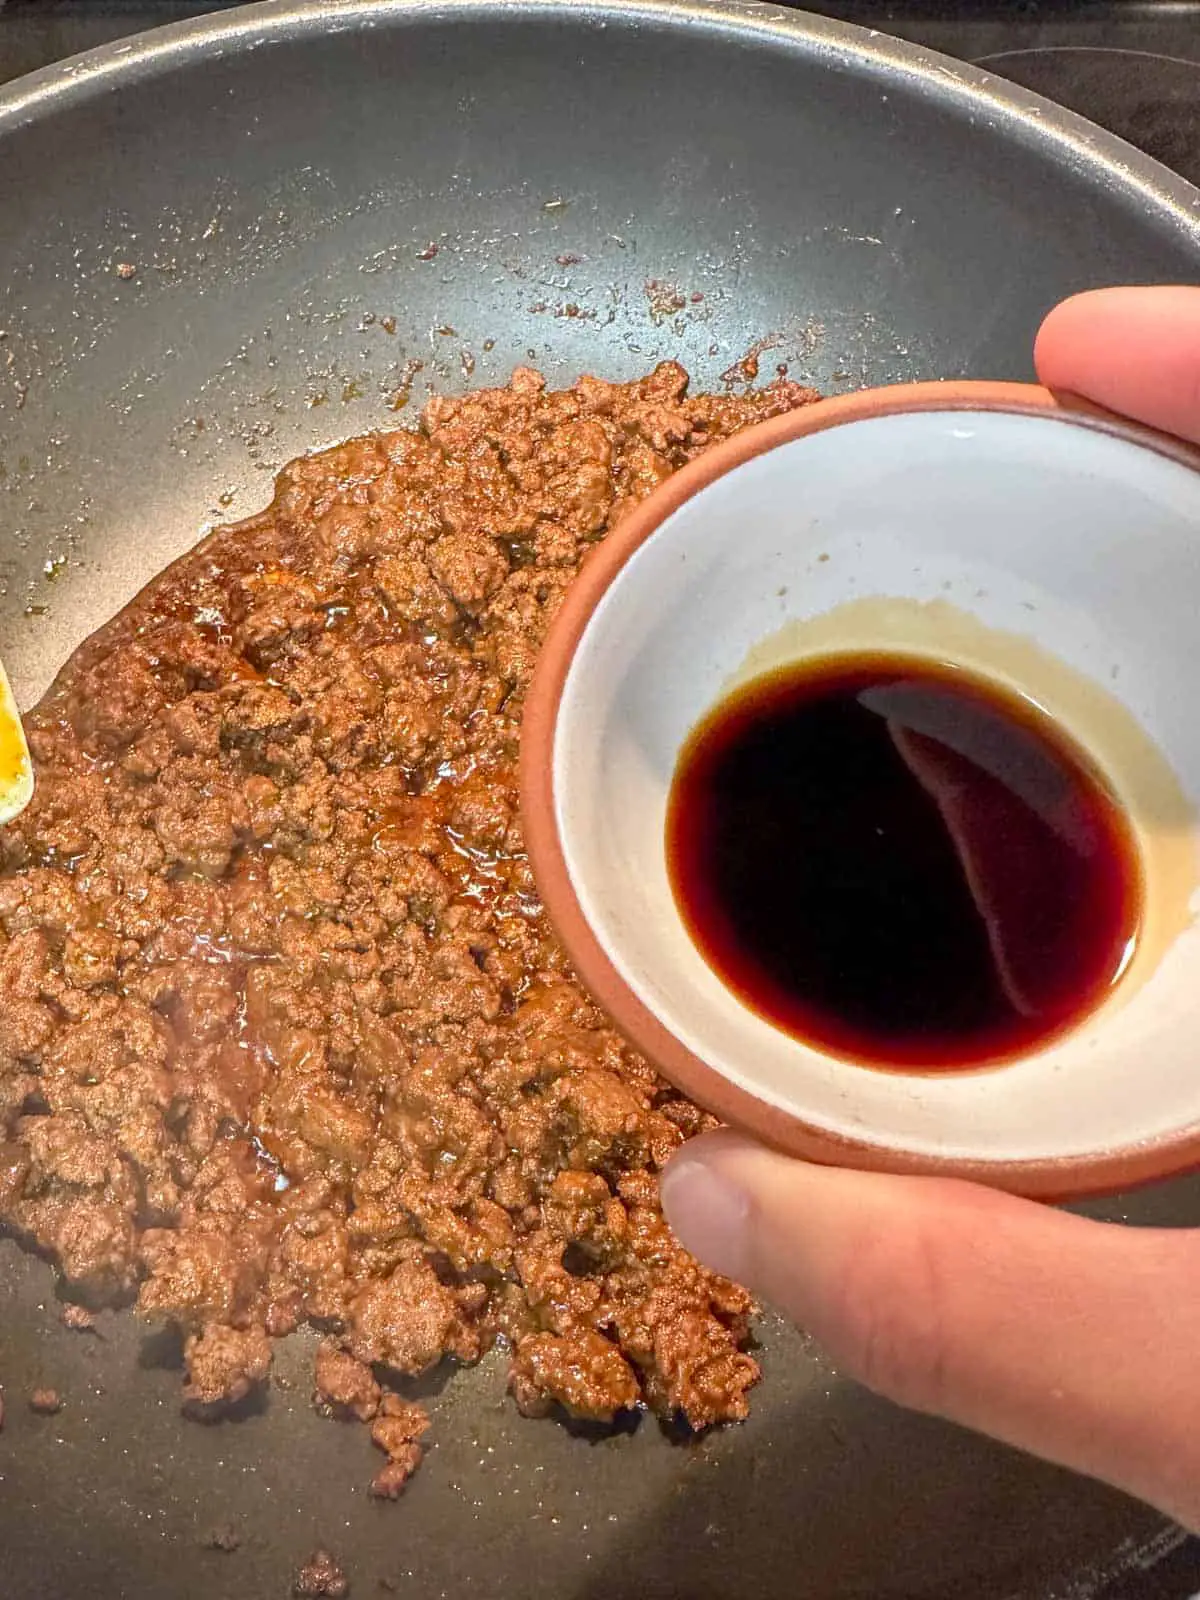 Browned ground beef cooked with taco seasoning in a wok in the background and a small bowl with soy sauce being held by someone in the foreground.